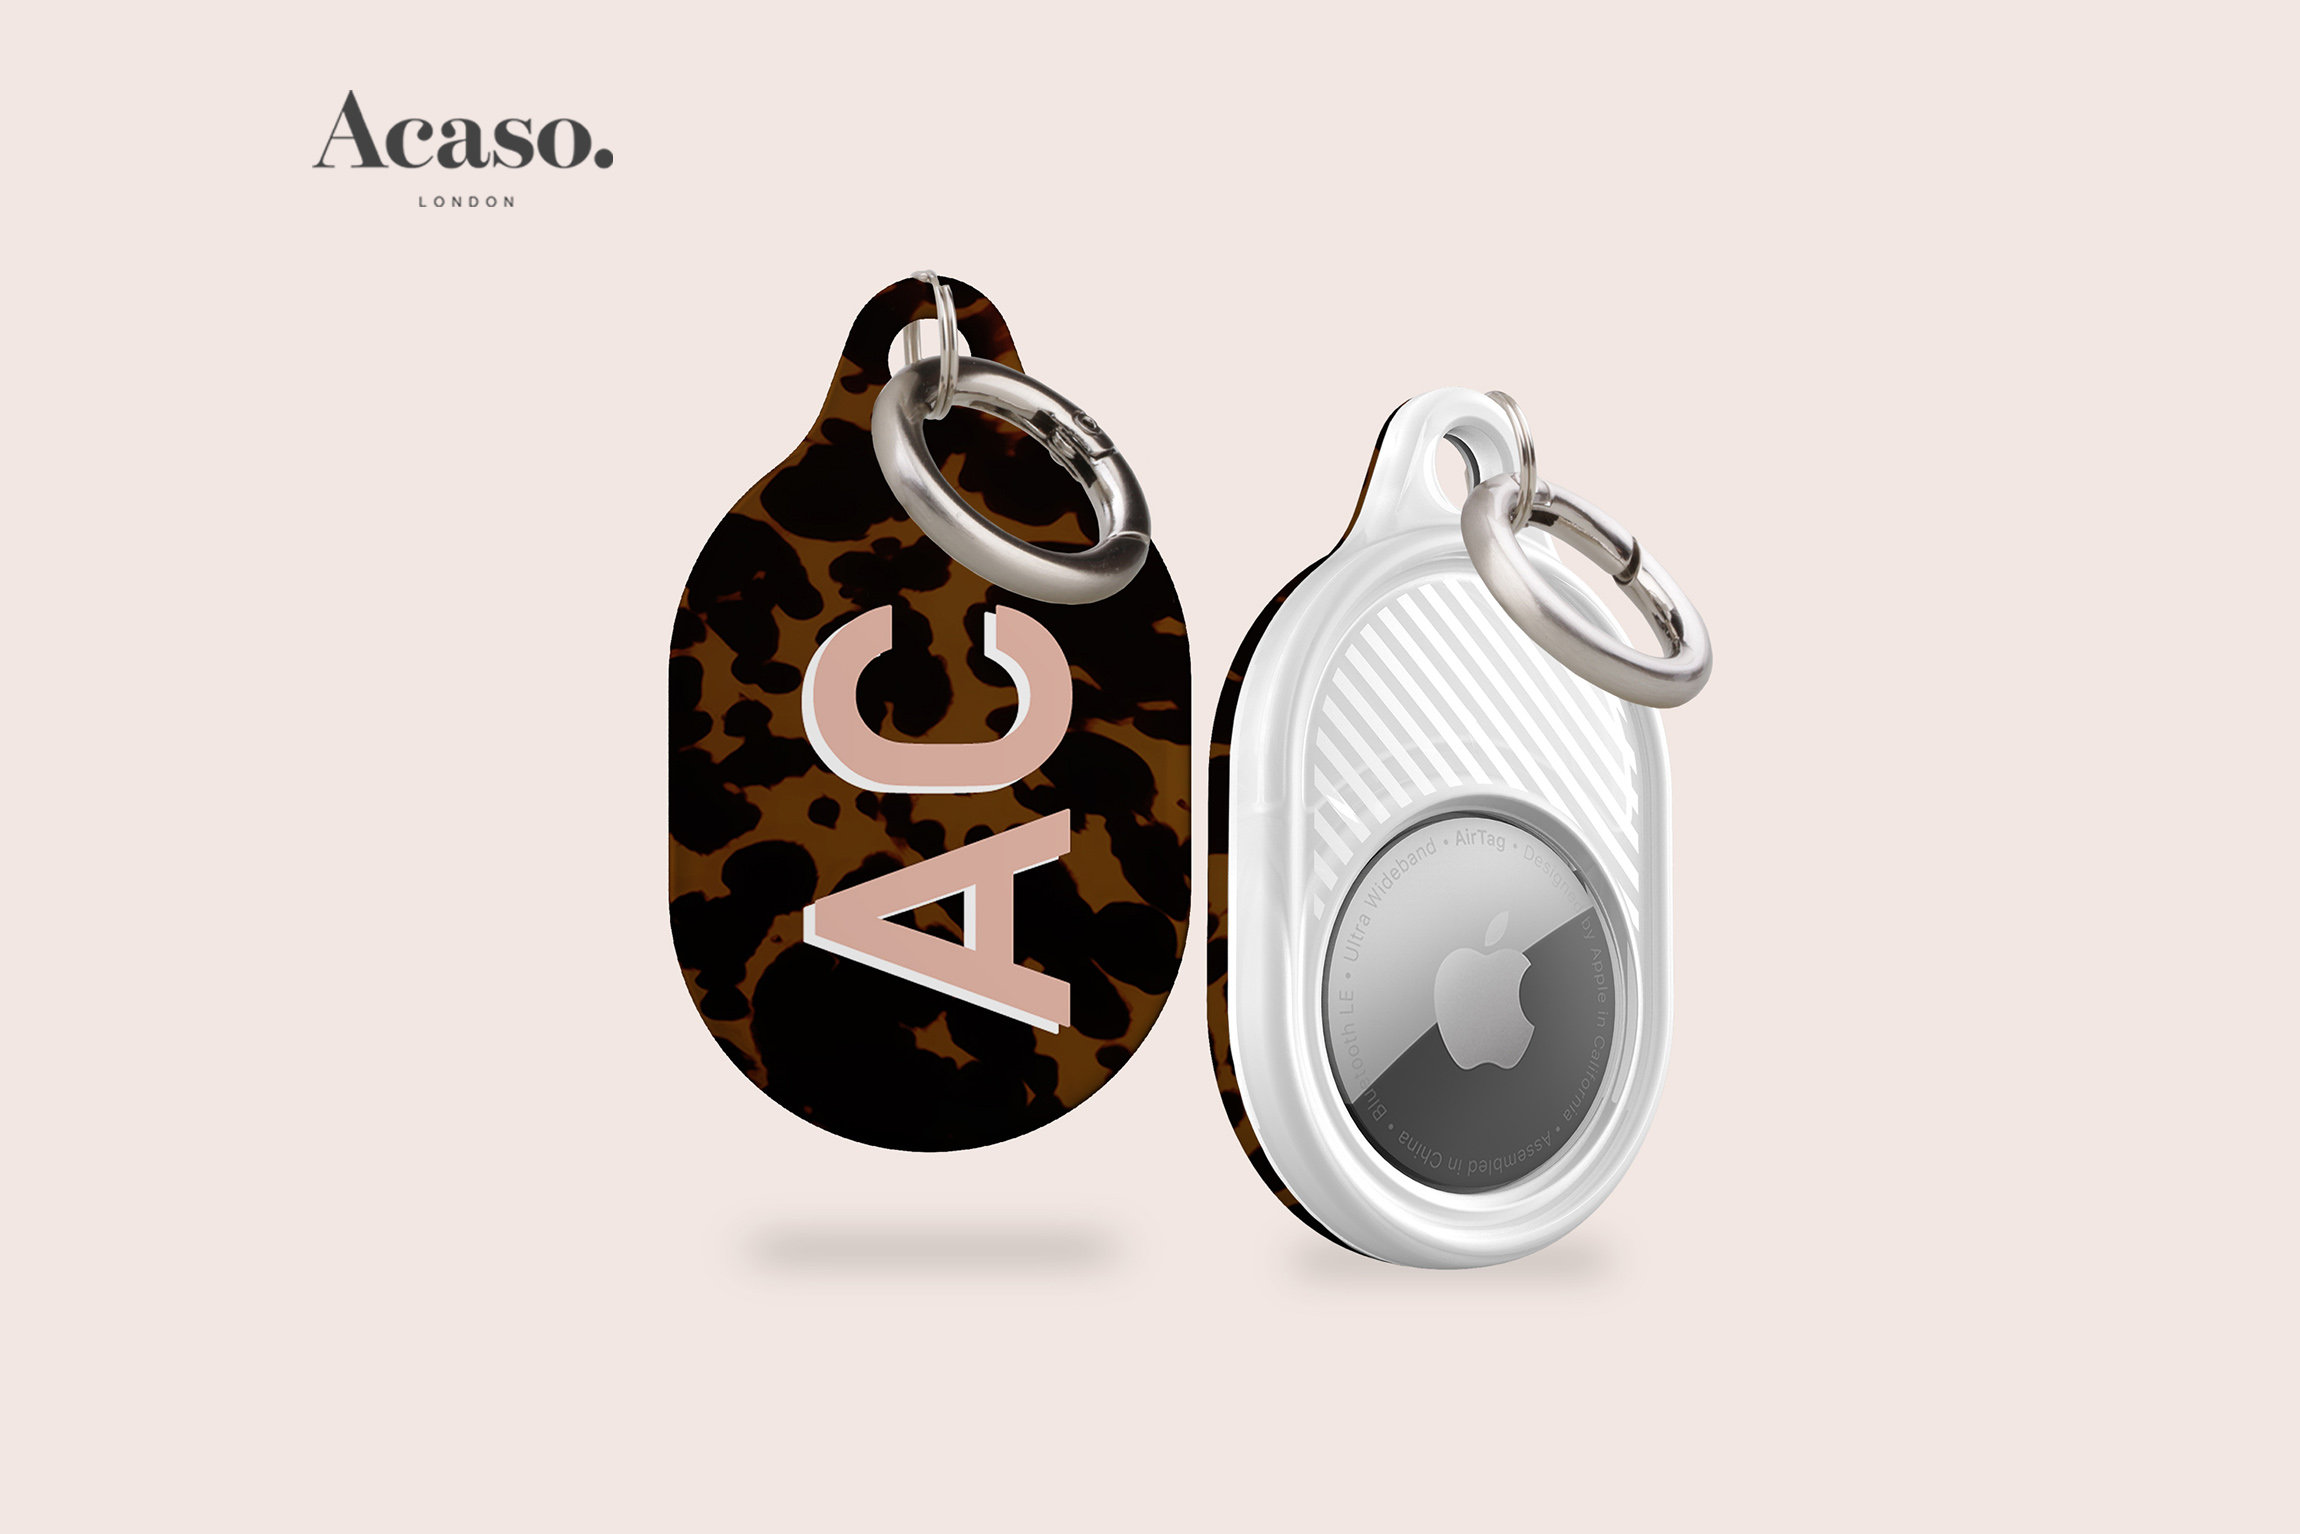 Apple AirTags for tracking your Vuitton